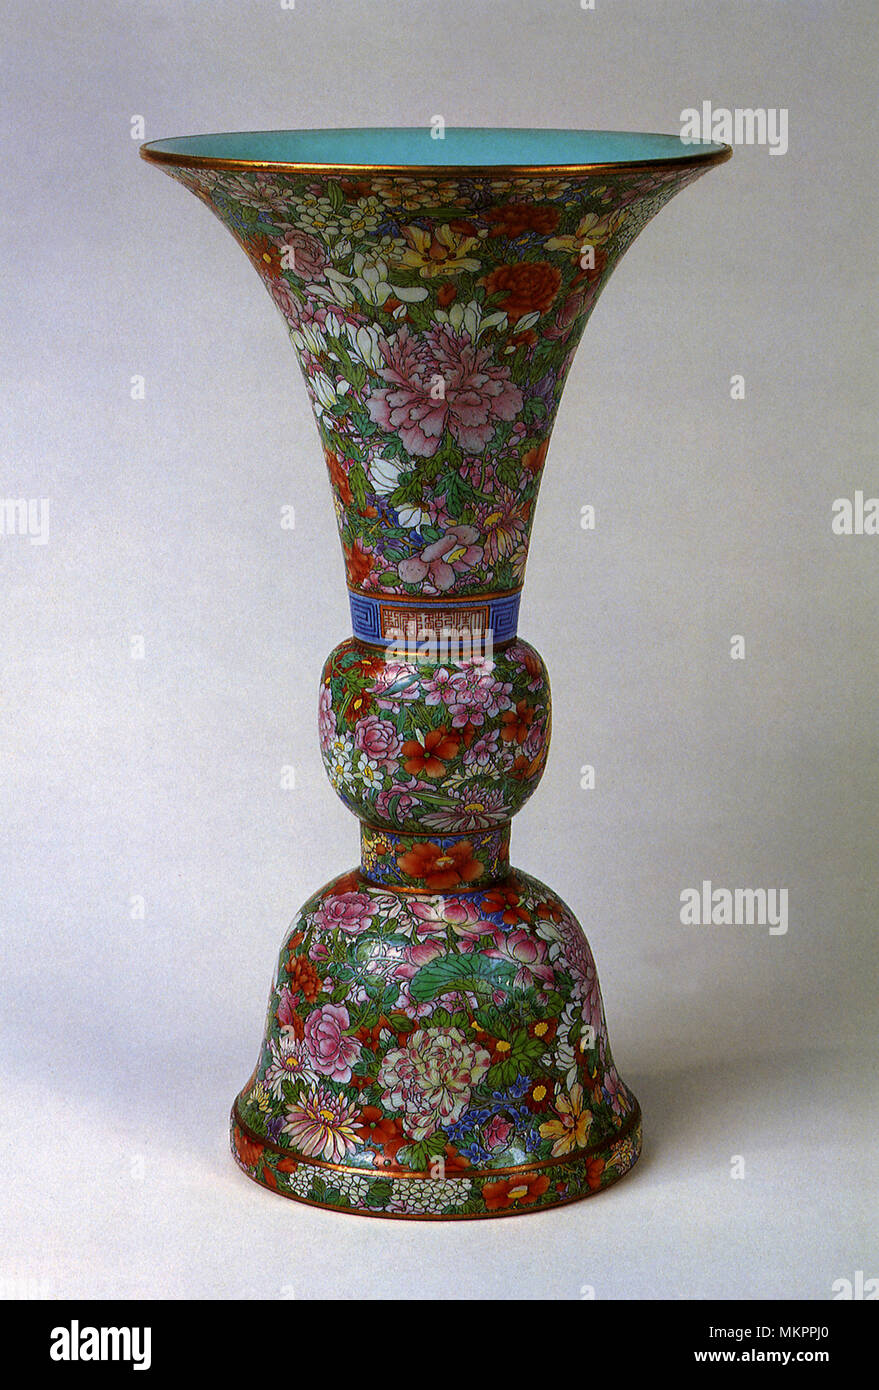 Goblet in Porcelain with Millefiori Design Stock Photo